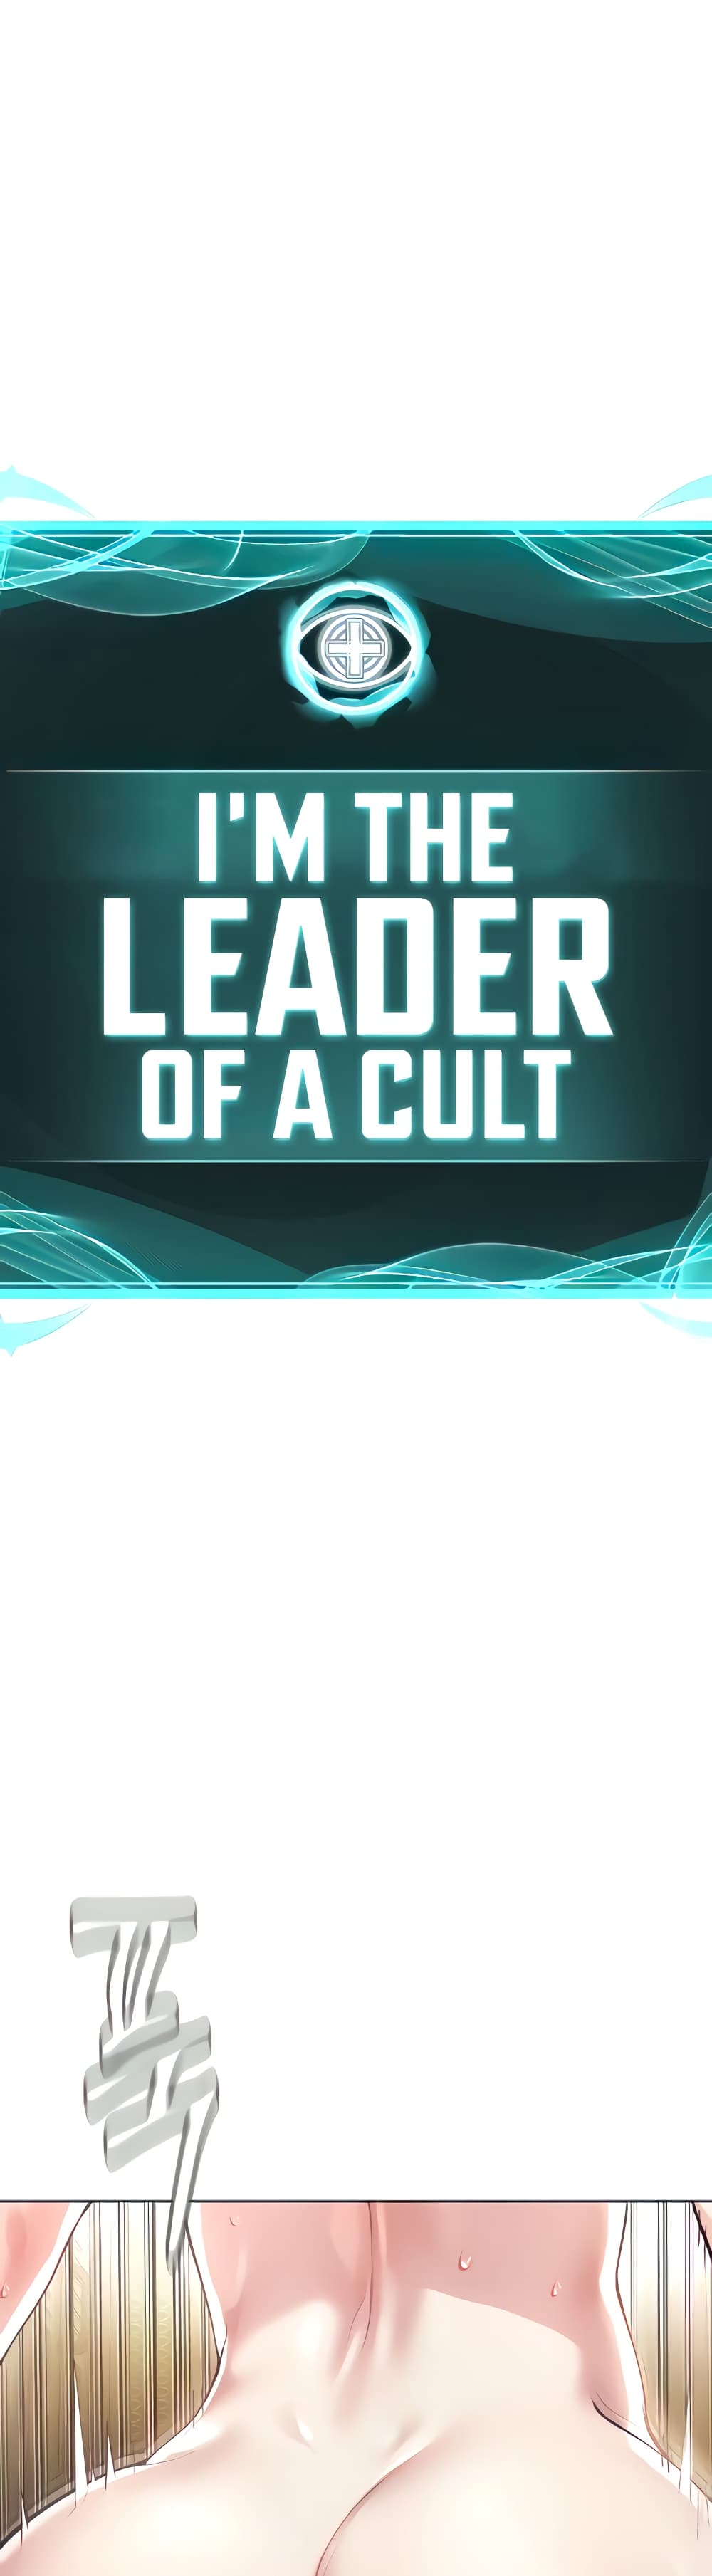 I’m The Leader Of A Cult 15-15